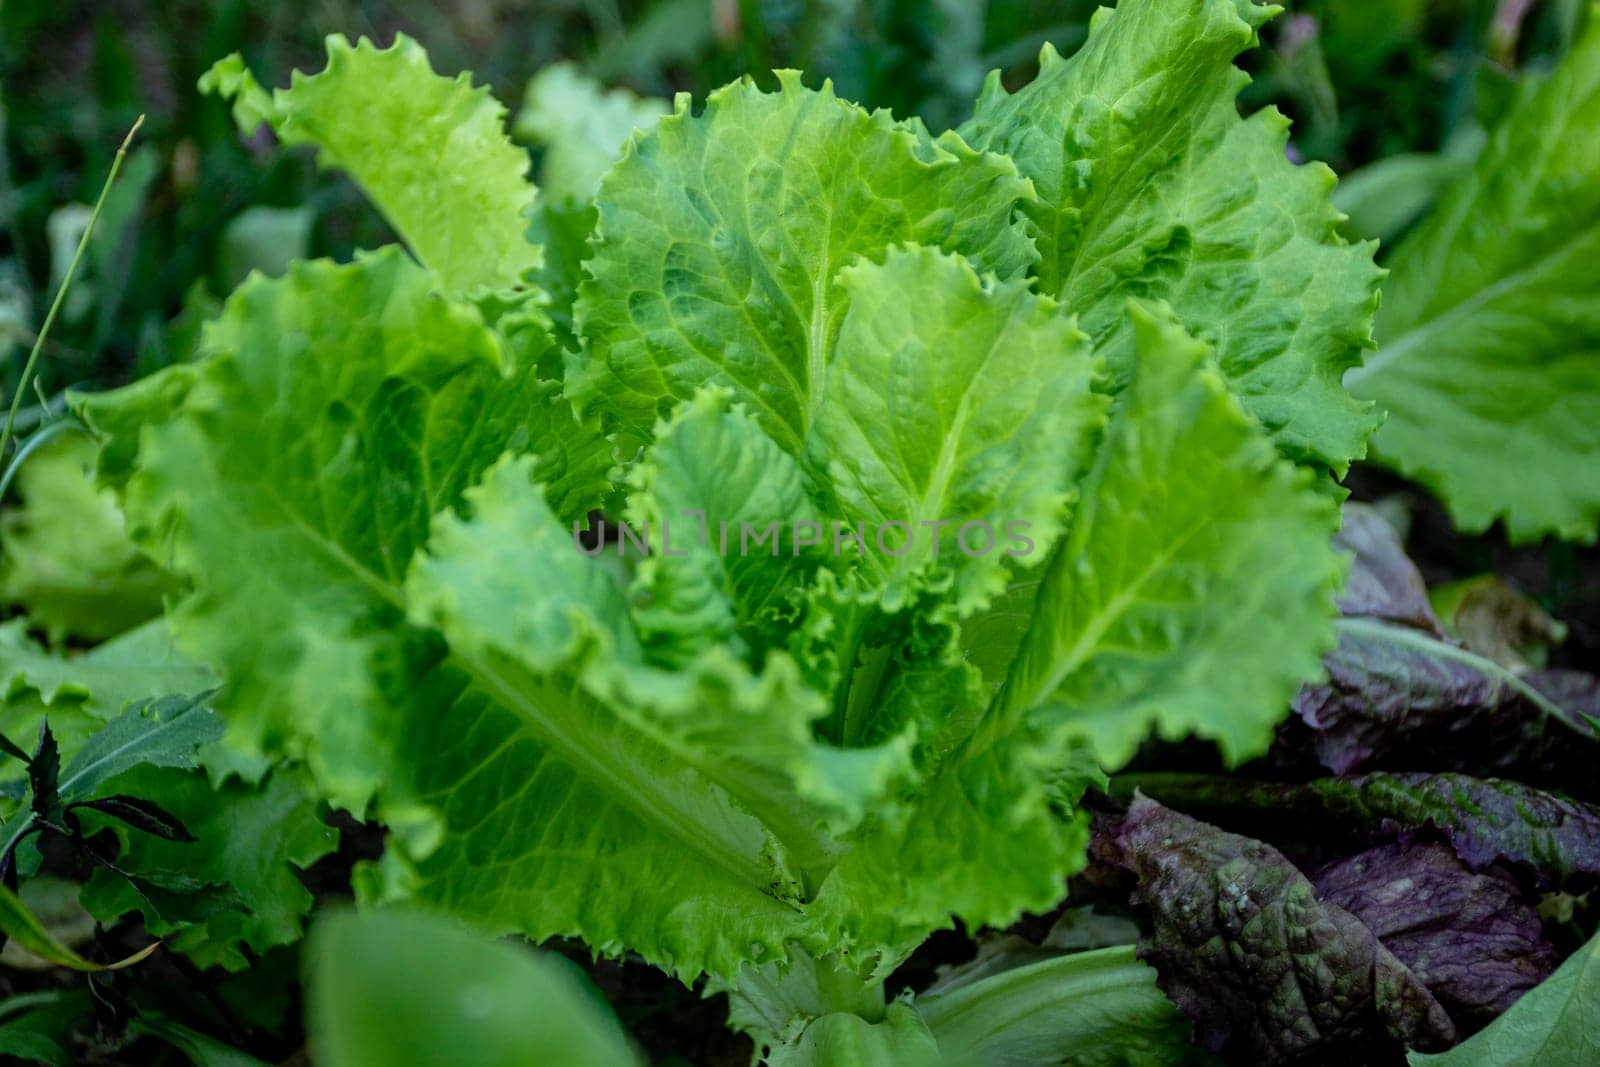 Green leaf lettuce in close-up on a bed among other plants. Gardening. the course of the plants. Eco-friendly food.